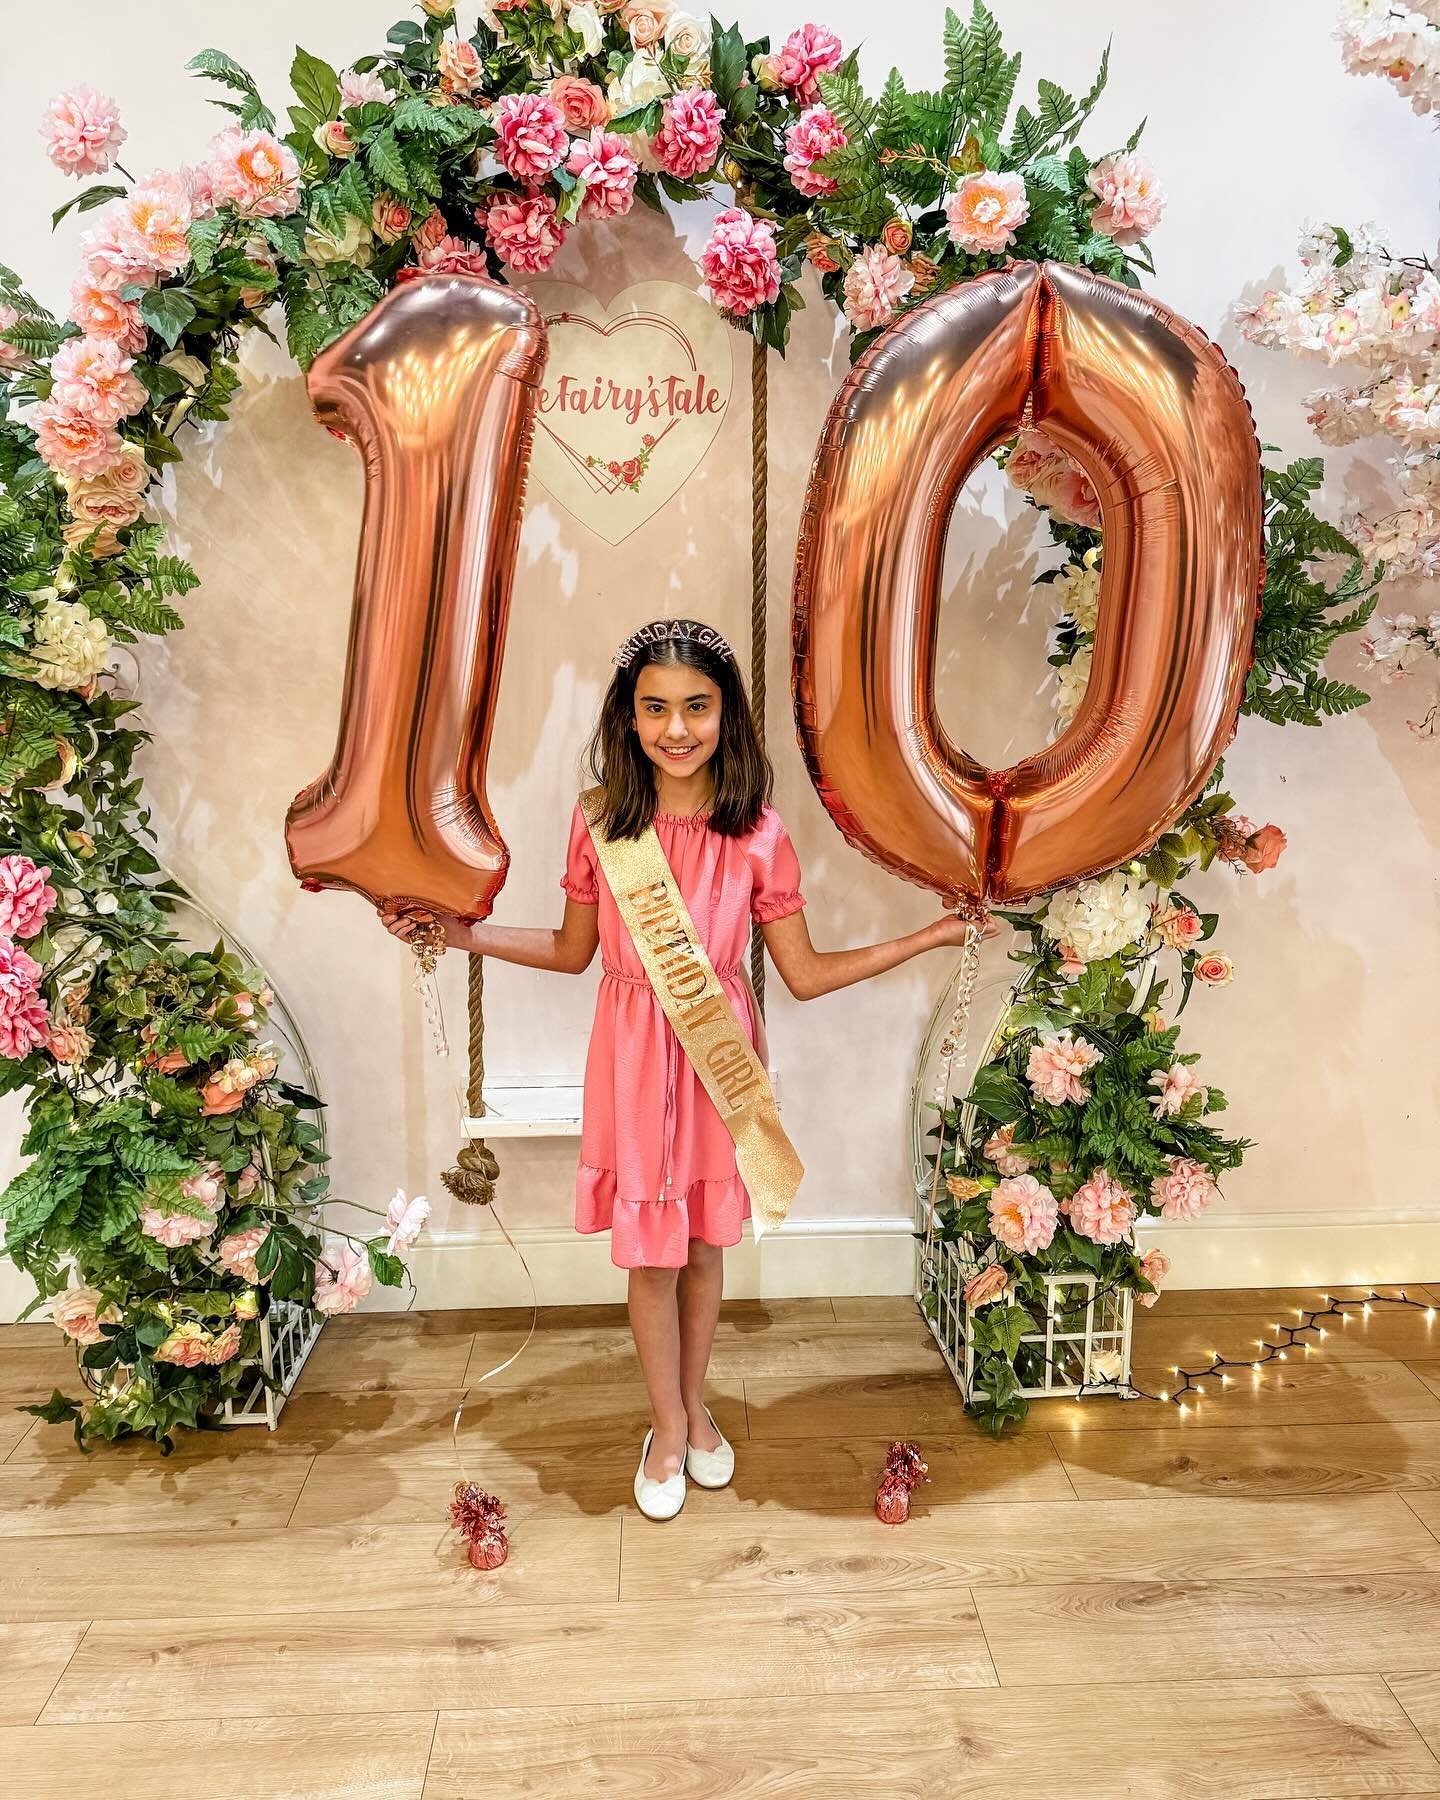 Spa Party fun for this gorgeous girlie 💖 Oh to be ten years old again! 😄💕

#spaparty #spapartyvenue #pamperparty #spaday #girlsspaday #spavenue #childrensspaparty